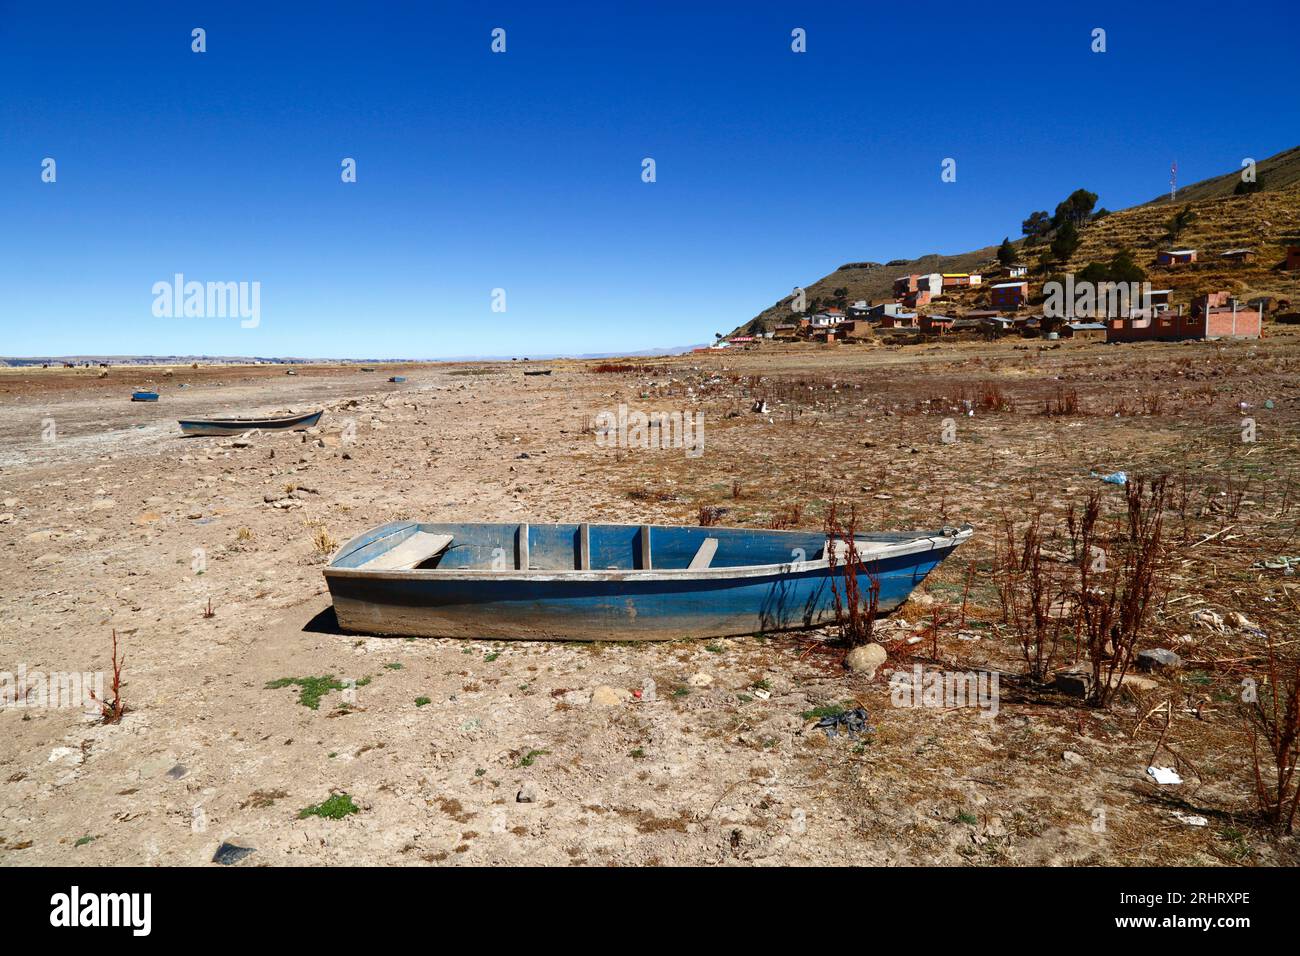 Lake Titicaca, BOLIVIA; August 18th 2023: Wooden rowing boats on the dried up shore of Cohana Bay on the Inner Lake / Huiñay Marka (the smaller part of Lake Titicaca) near the village of Cohana (in the background). Water levels in Lake Titicaca are approaching the record low level set in 1996, the lowest since Bolivia's weather service (Senhami) started keeping records in 1974. Many are blaming climate change; the last few years have been drier than normal and El Niño is currently strengthening in the Pacific Ocean off South America. Stock Photo